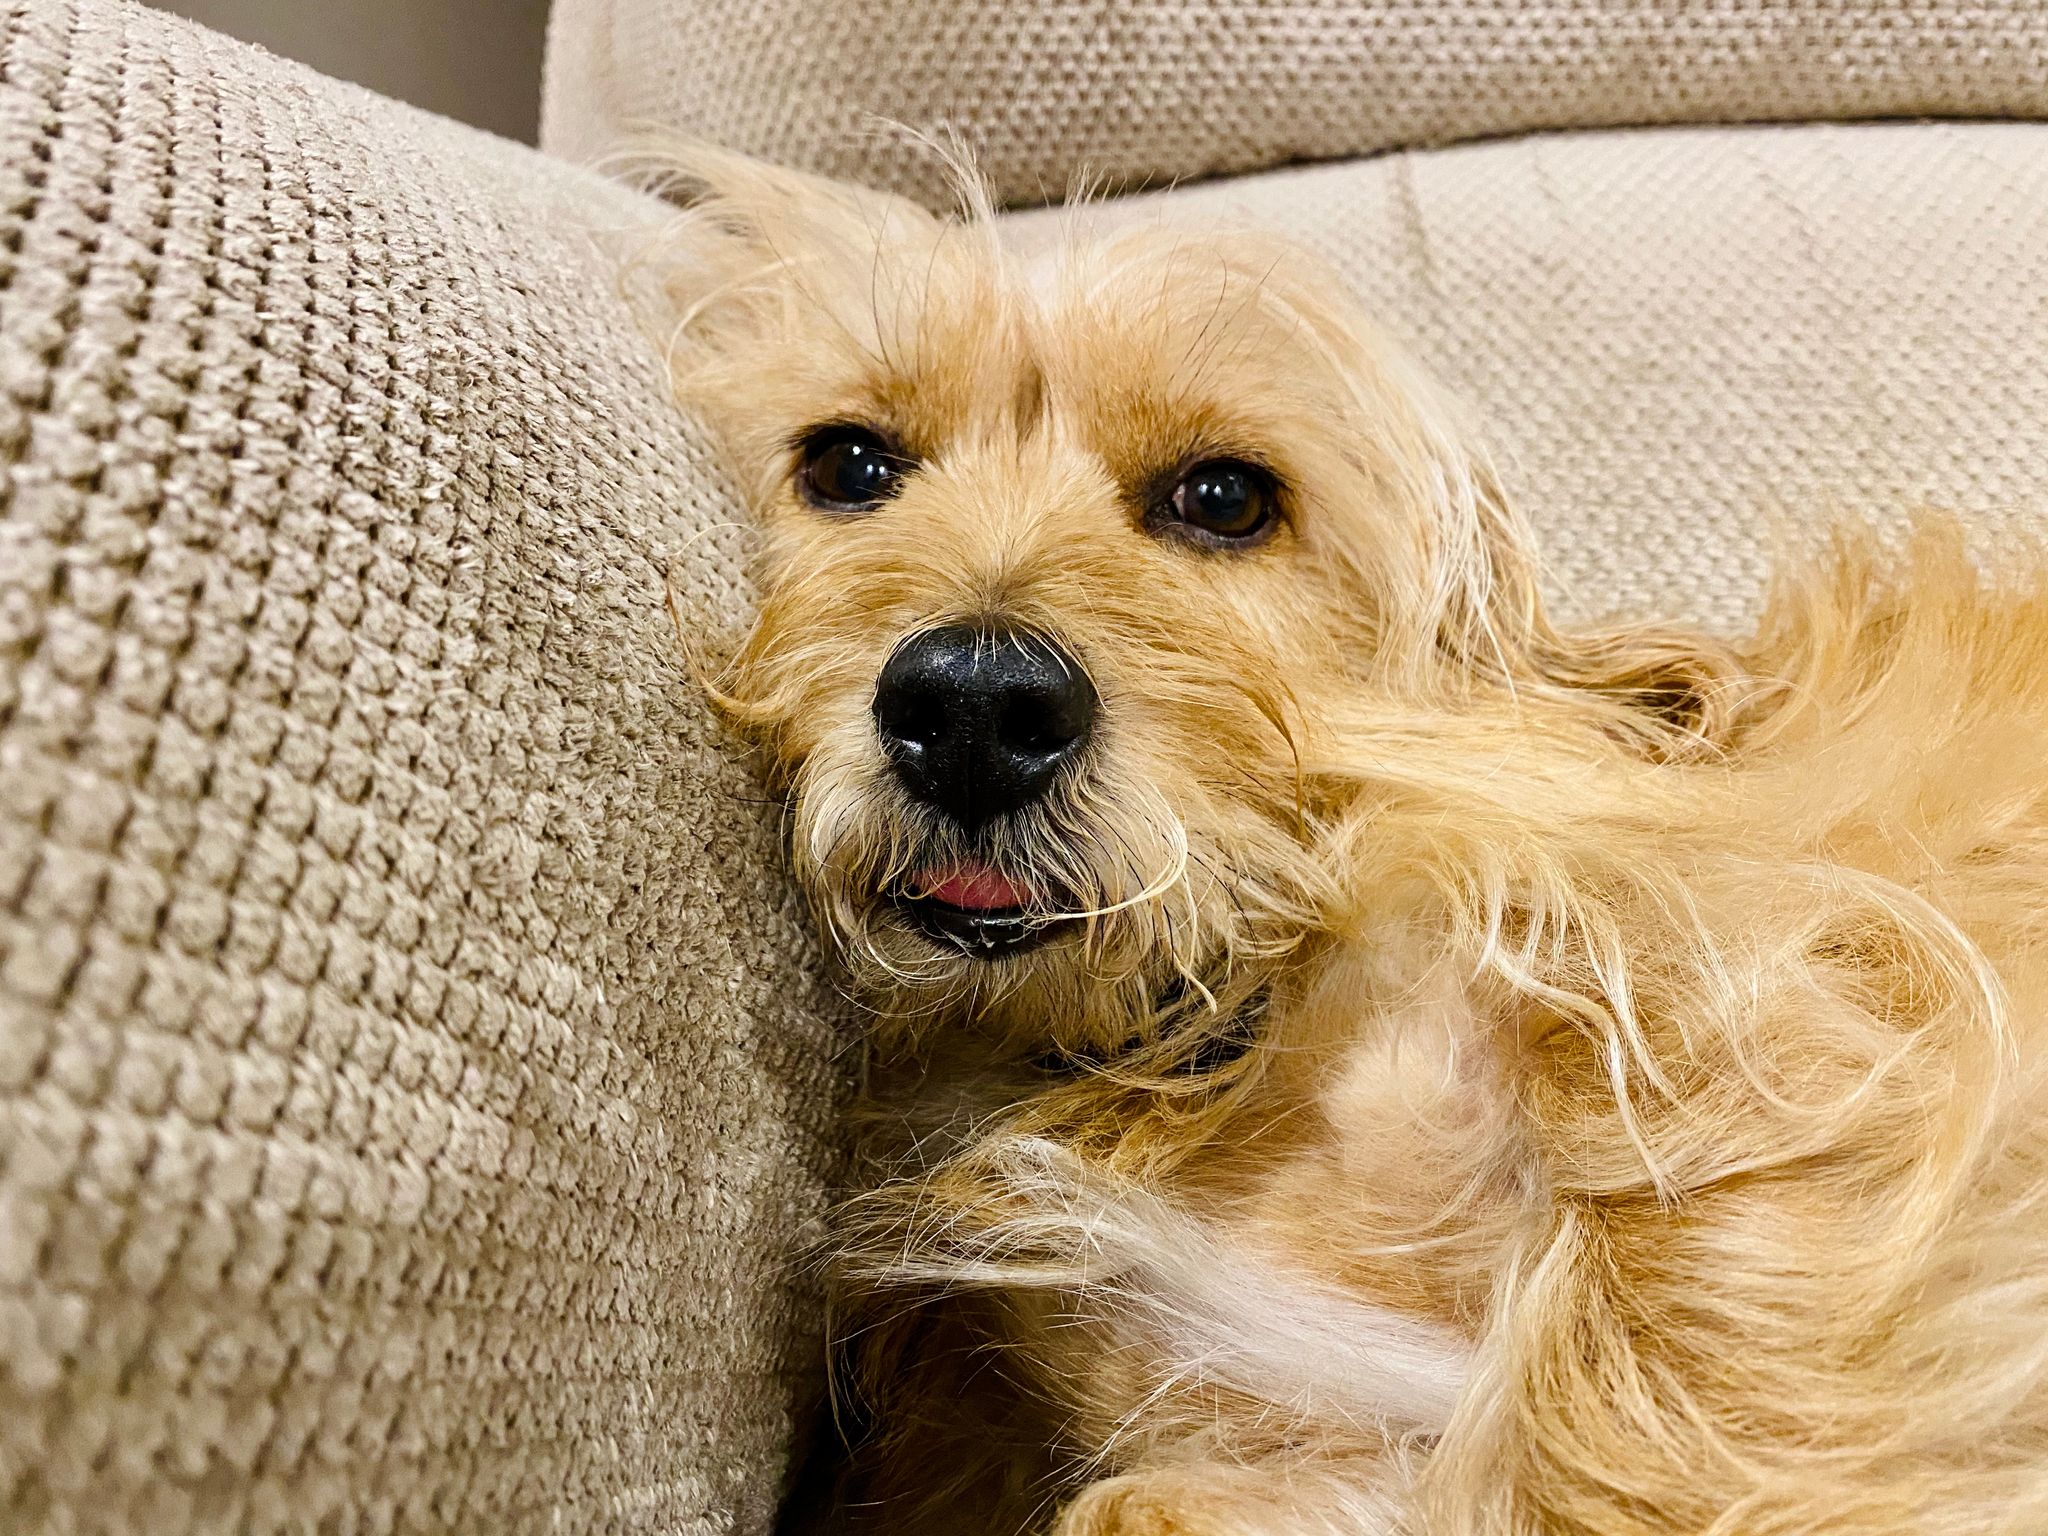 A photo of a small scruffy blonde dog with his head against the side of a lounge, half asleep with his tongue poking out.